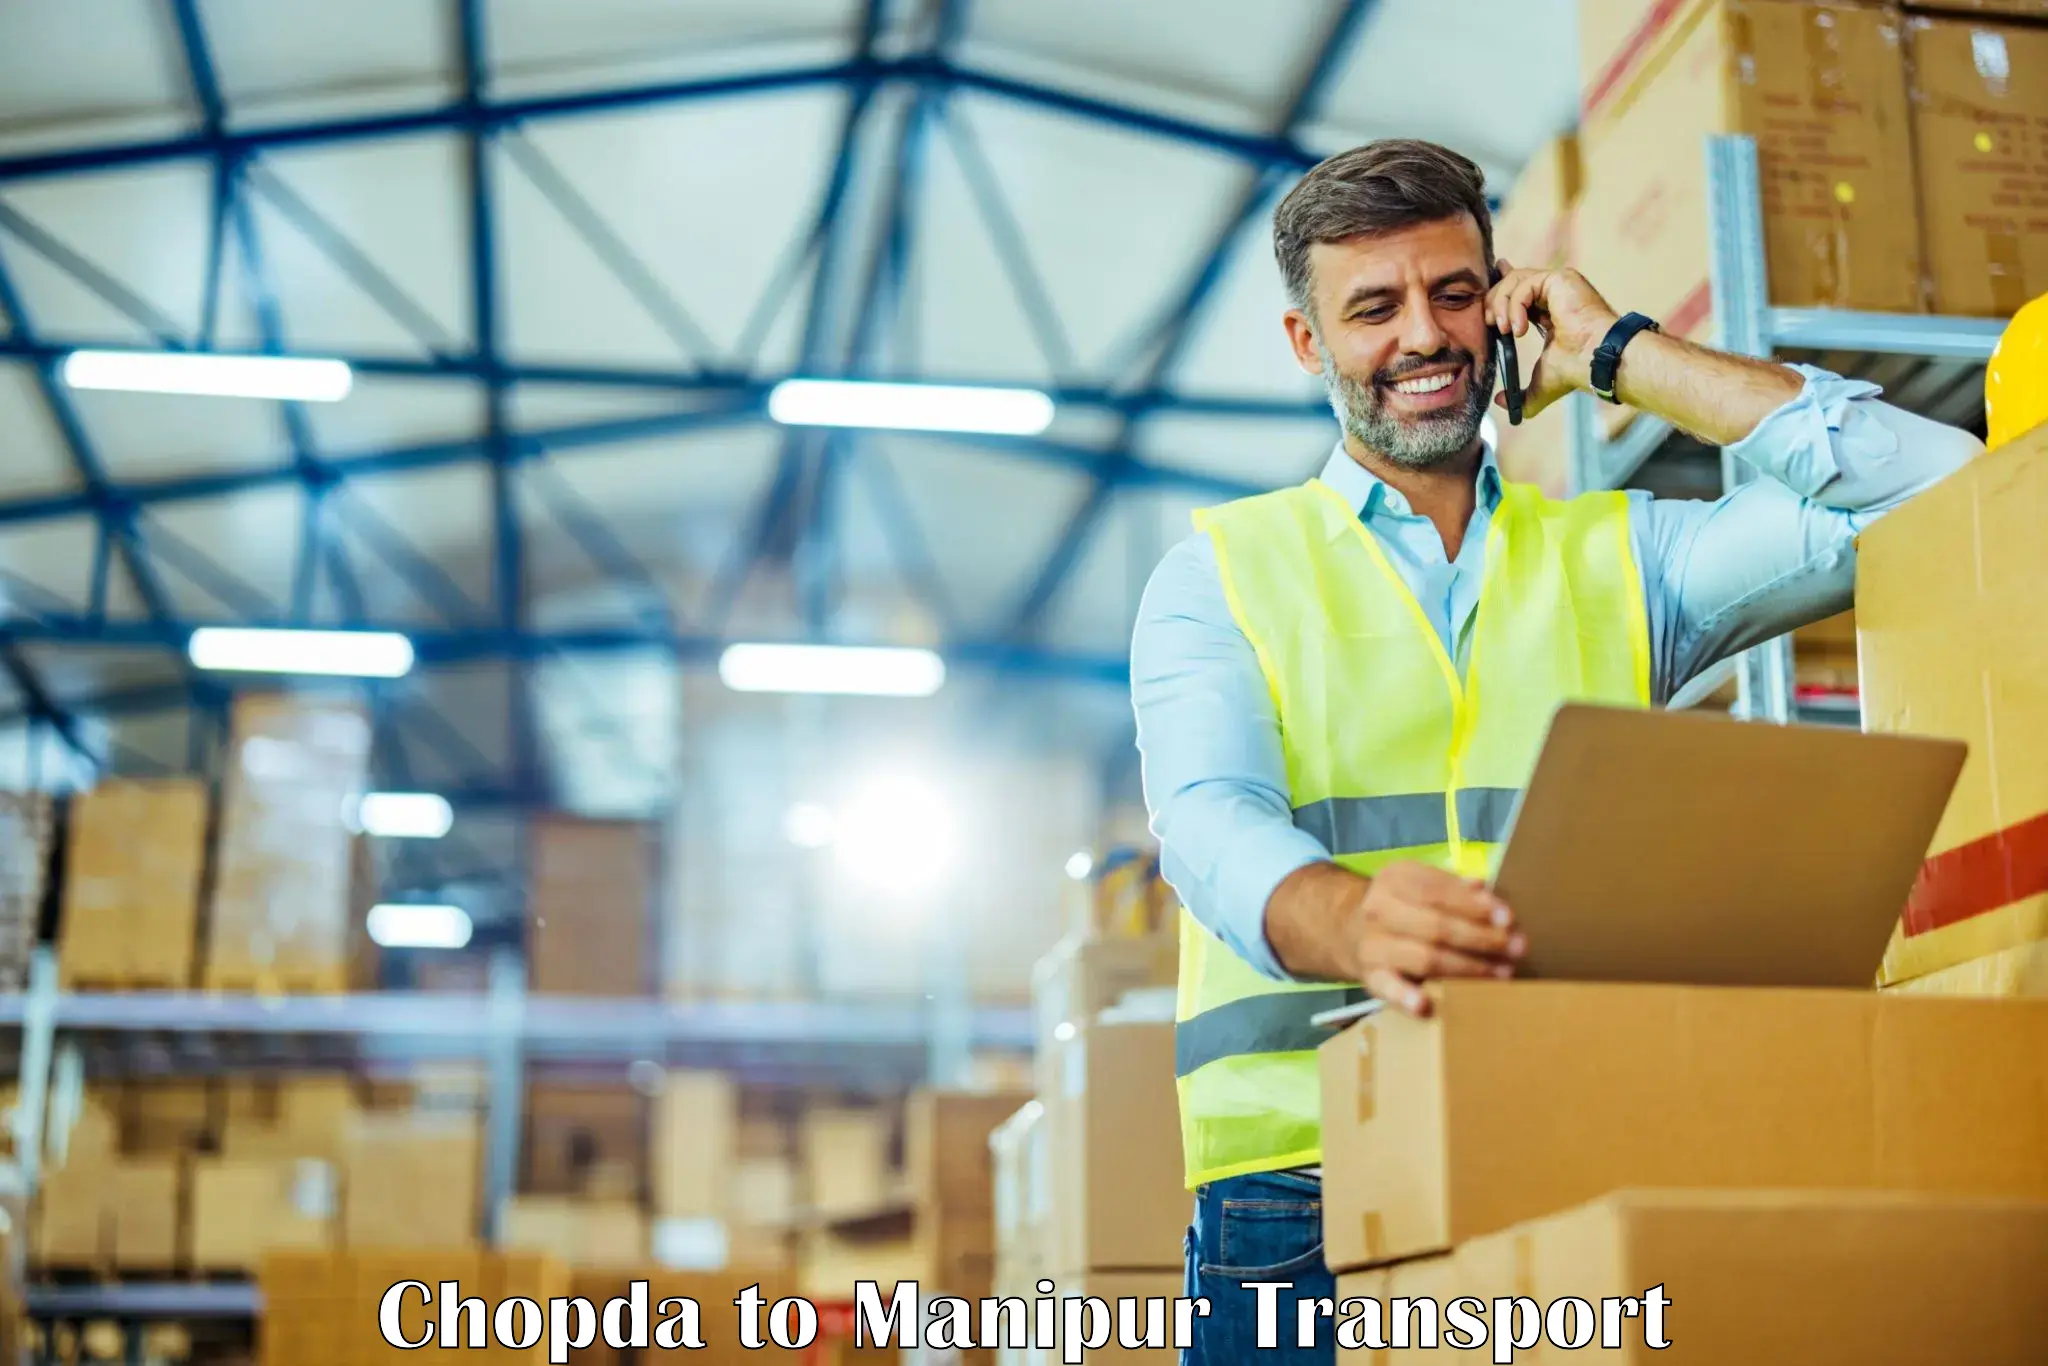 Truck transport companies in India Chopda to Imphal